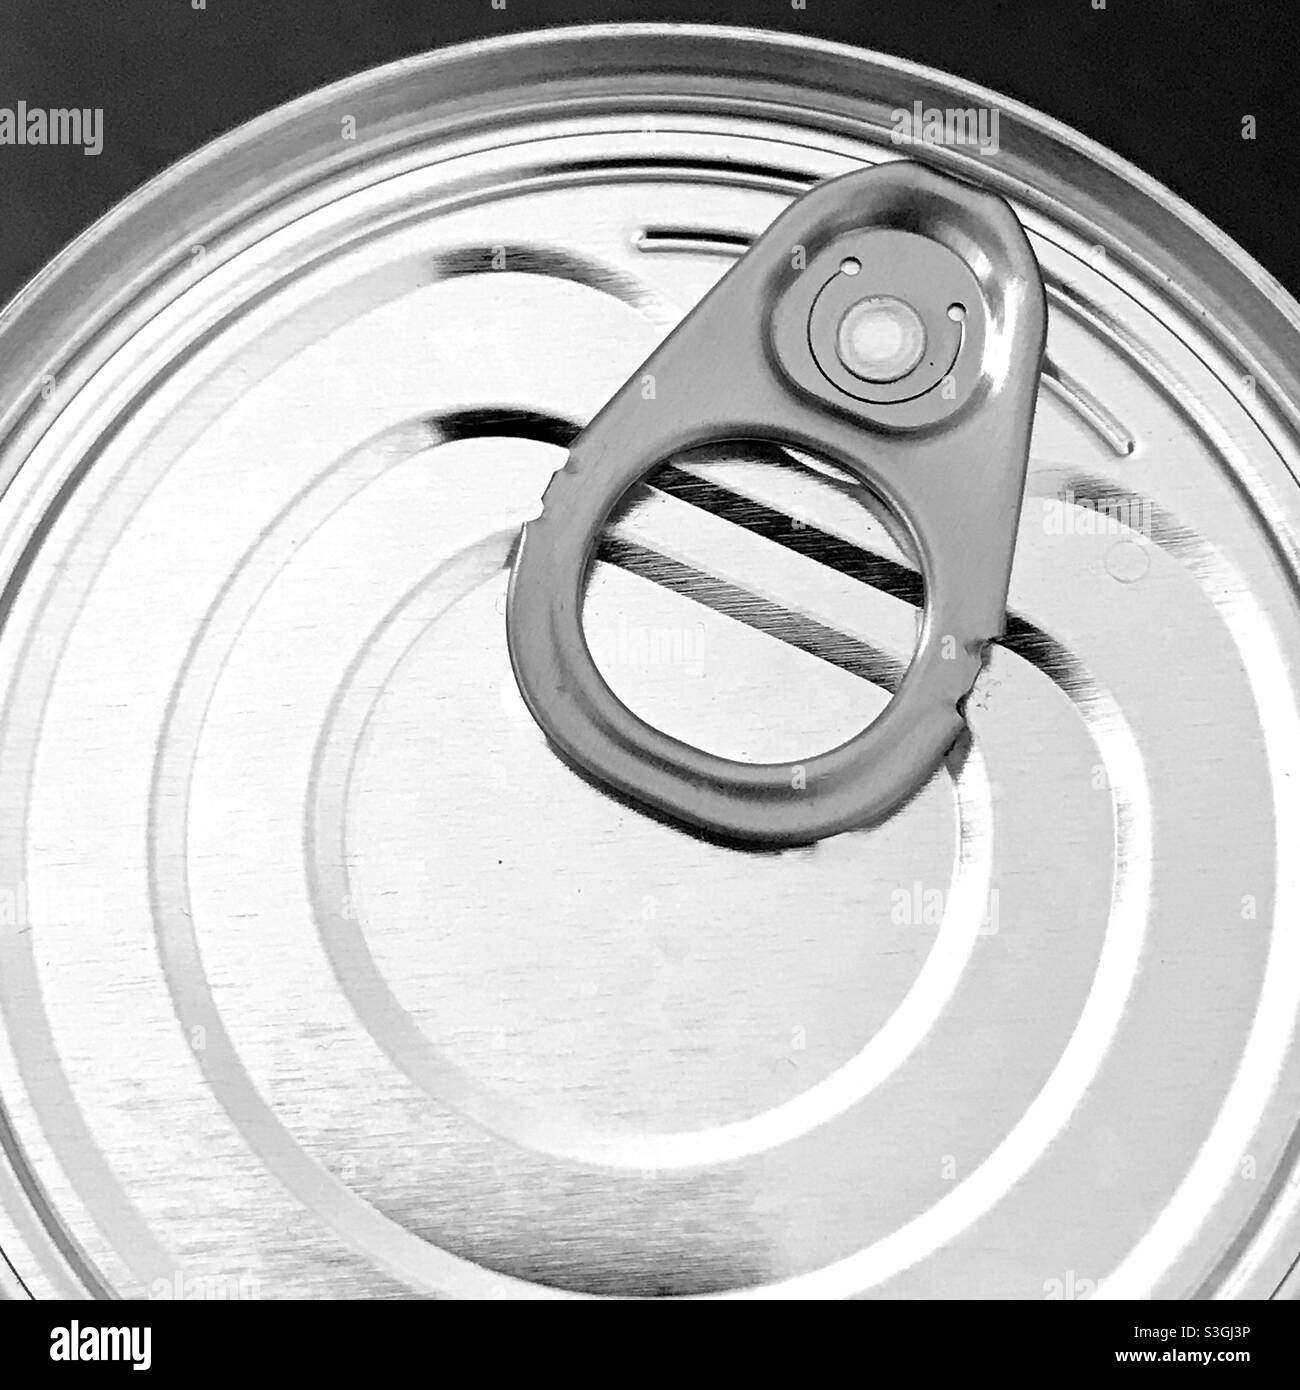 It’s in the can! Canned food ring pull close up. Stock Photo